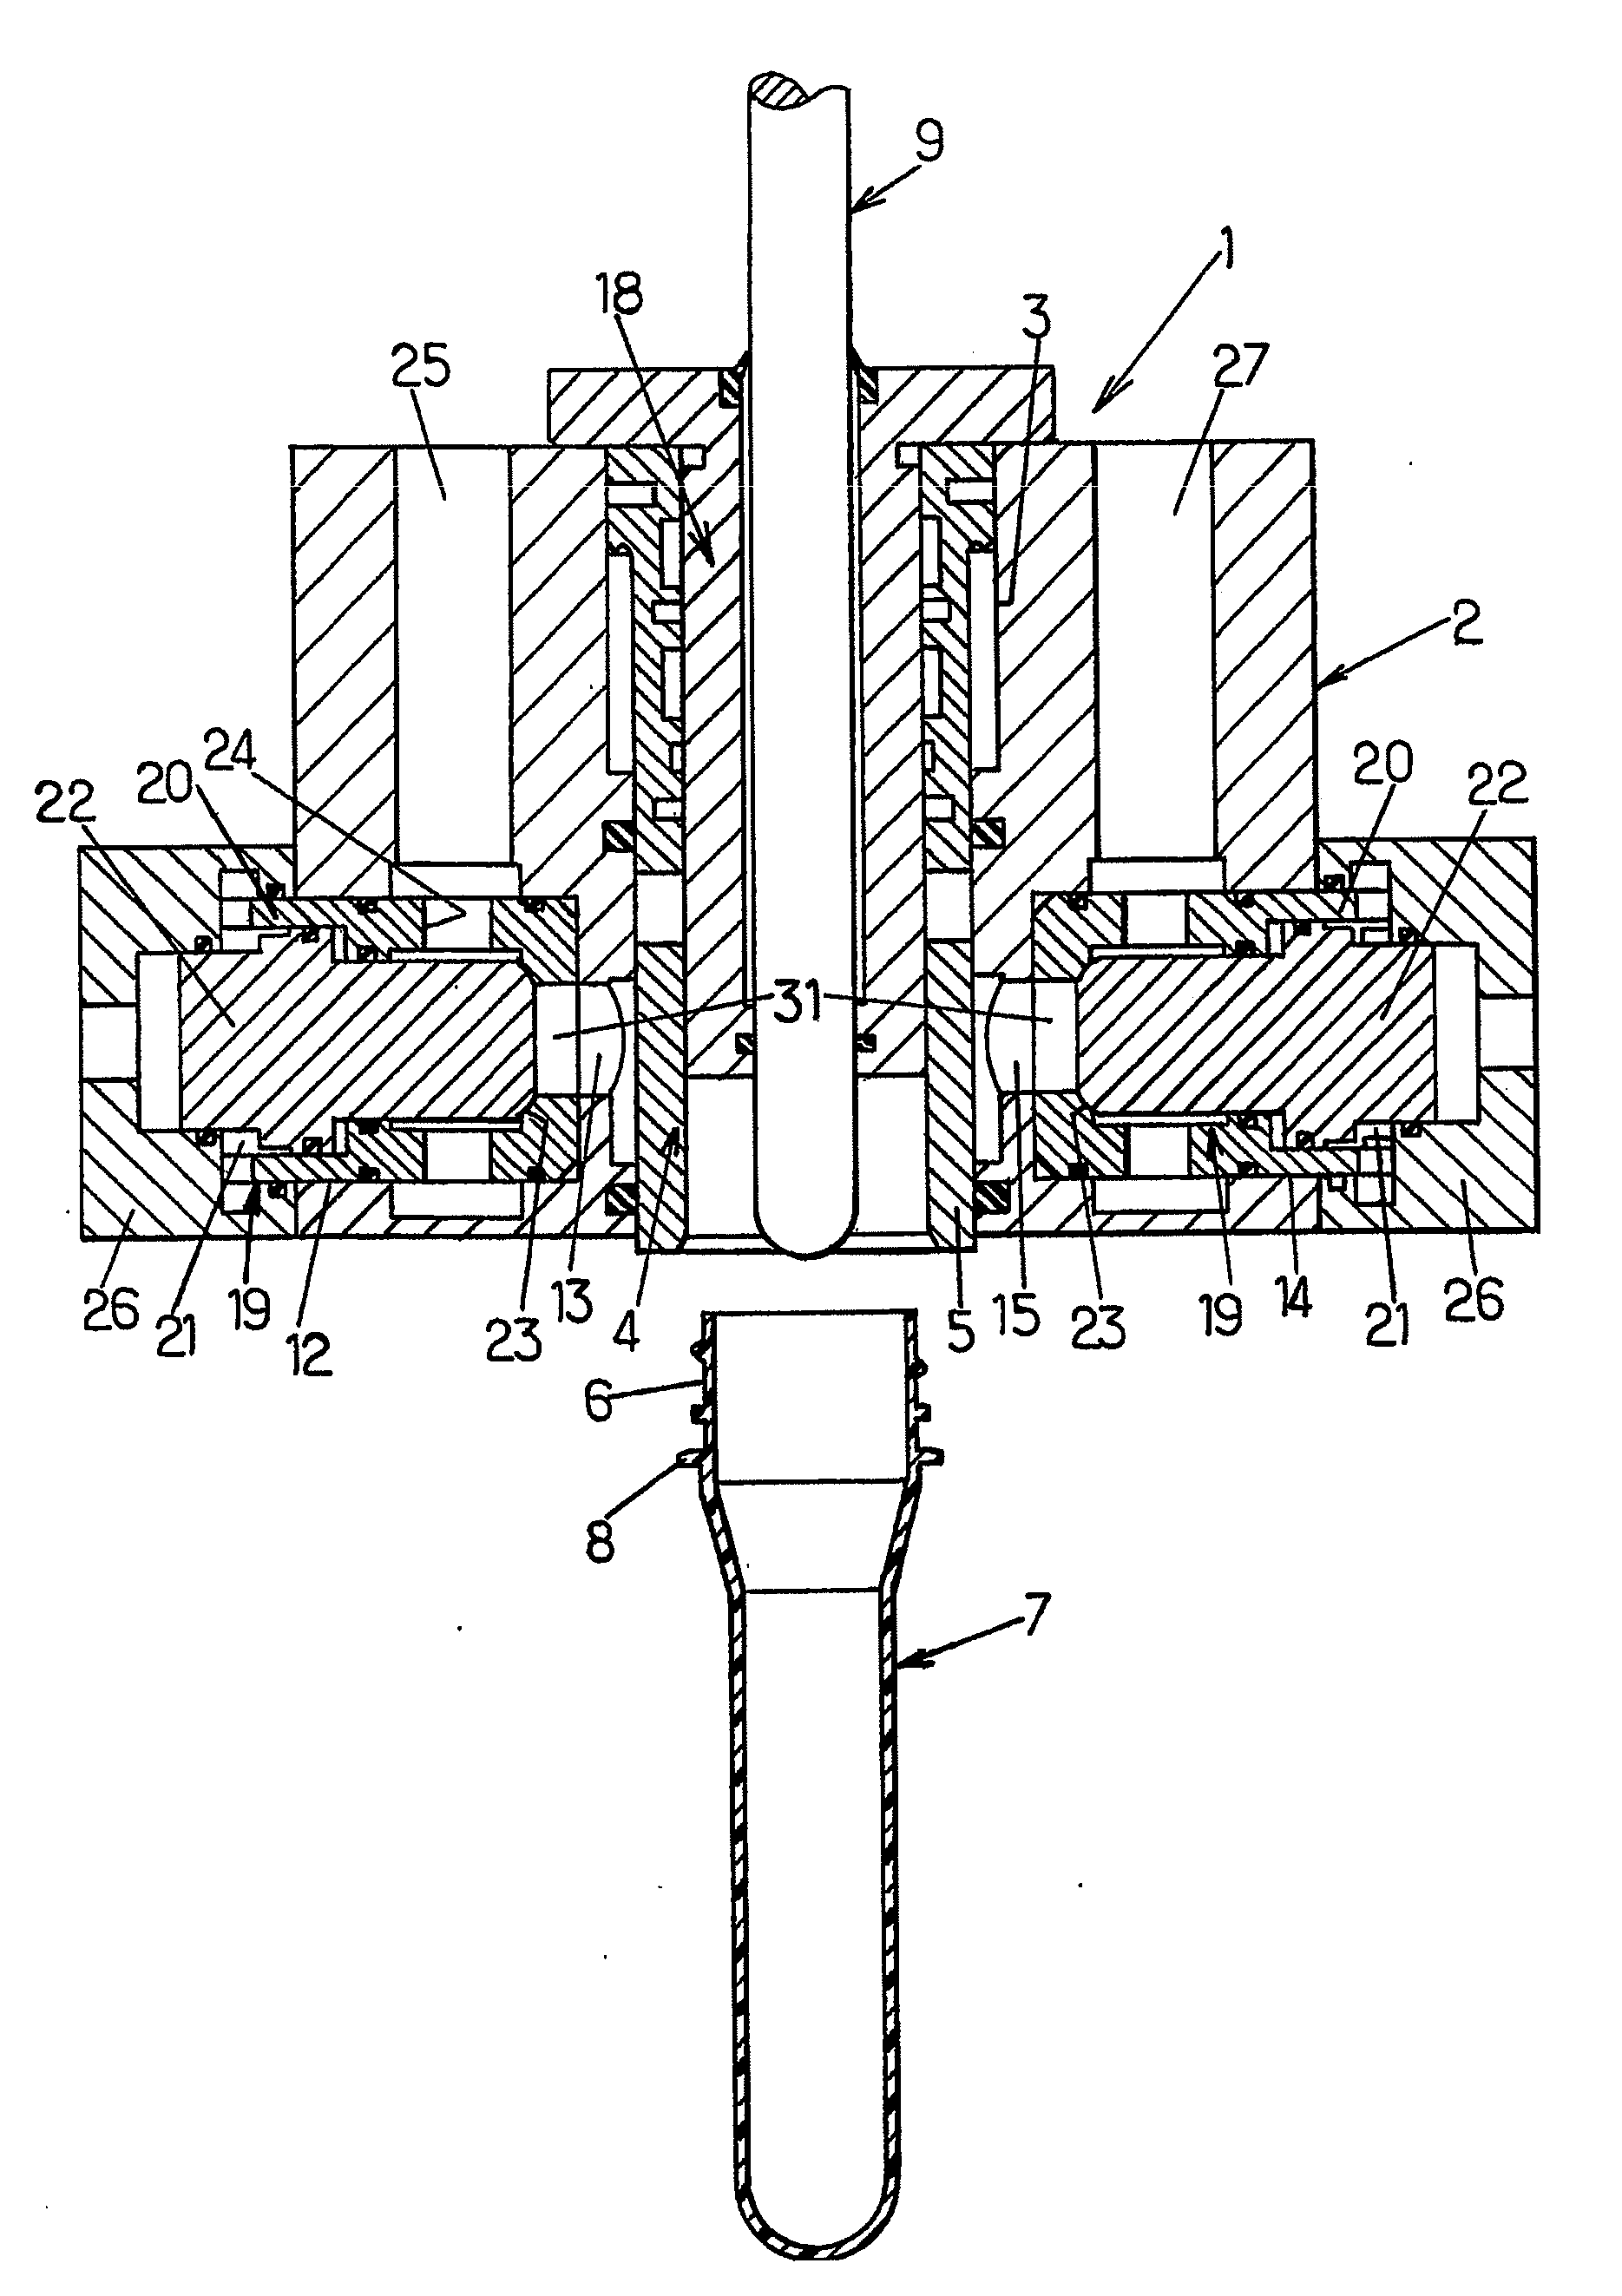 Device for blowing thermoplastic containers